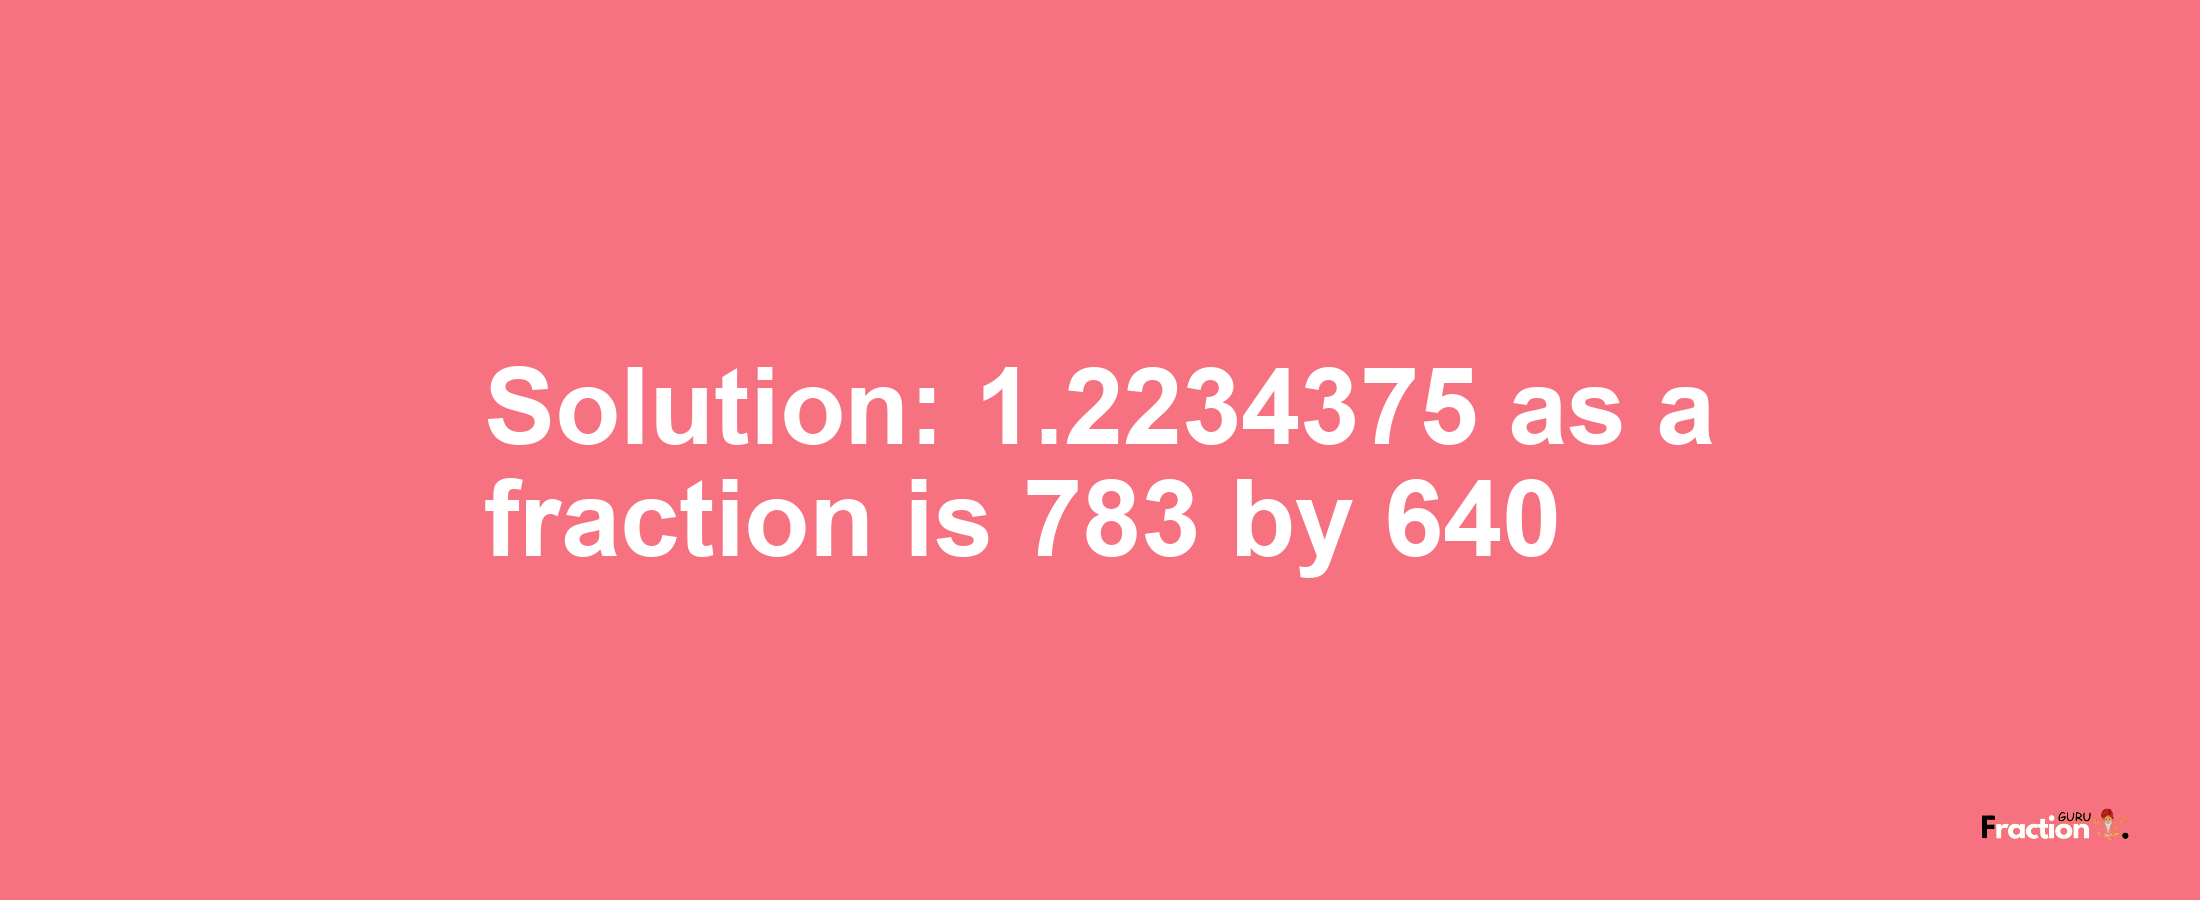 Solution:1.2234375 as a fraction is 783/640